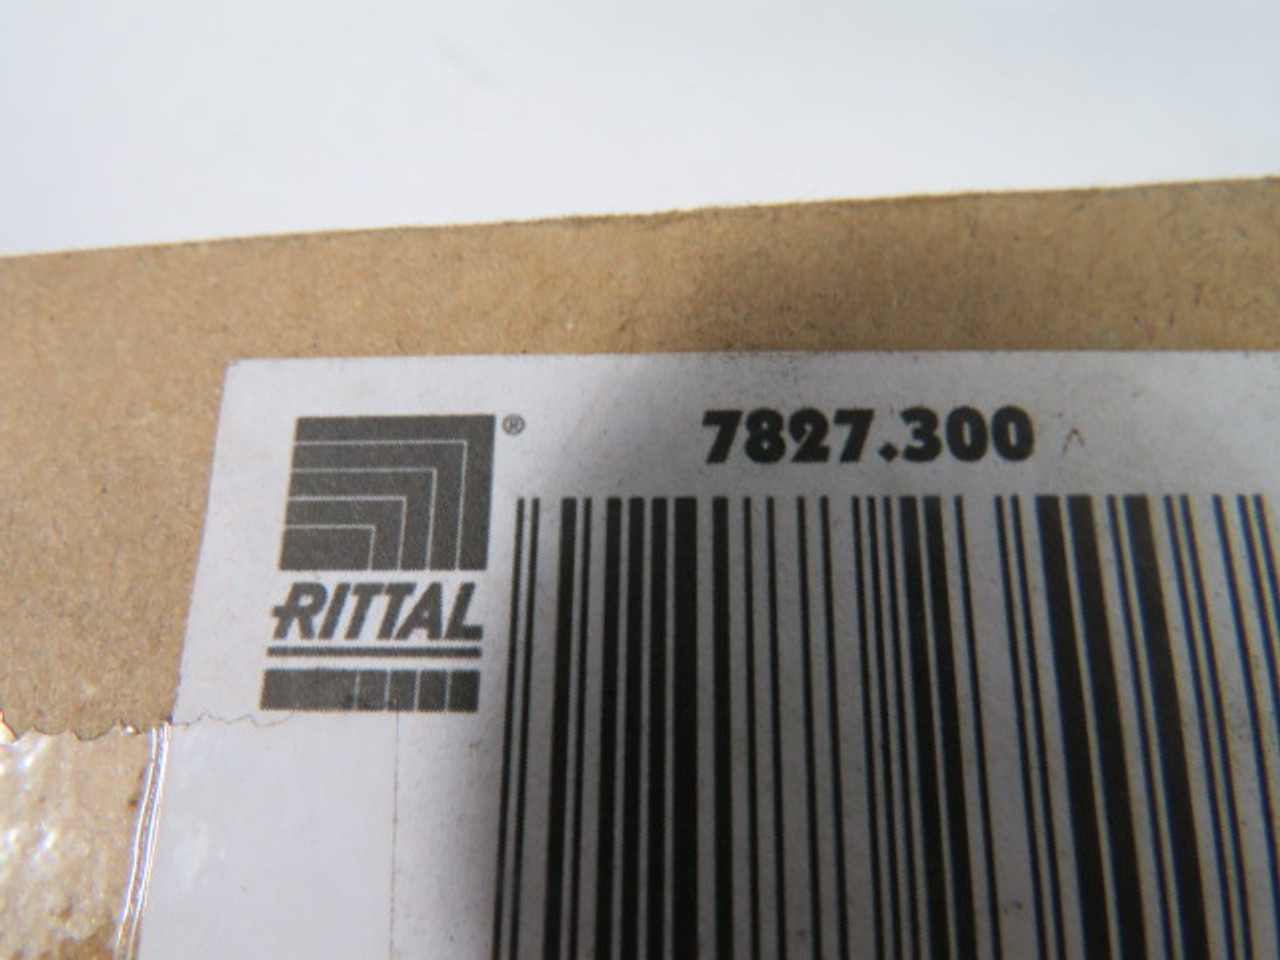 Rittal 7827.300 Adapter for L rails for TS Network Enclosure 4Pcs ! AS IS !